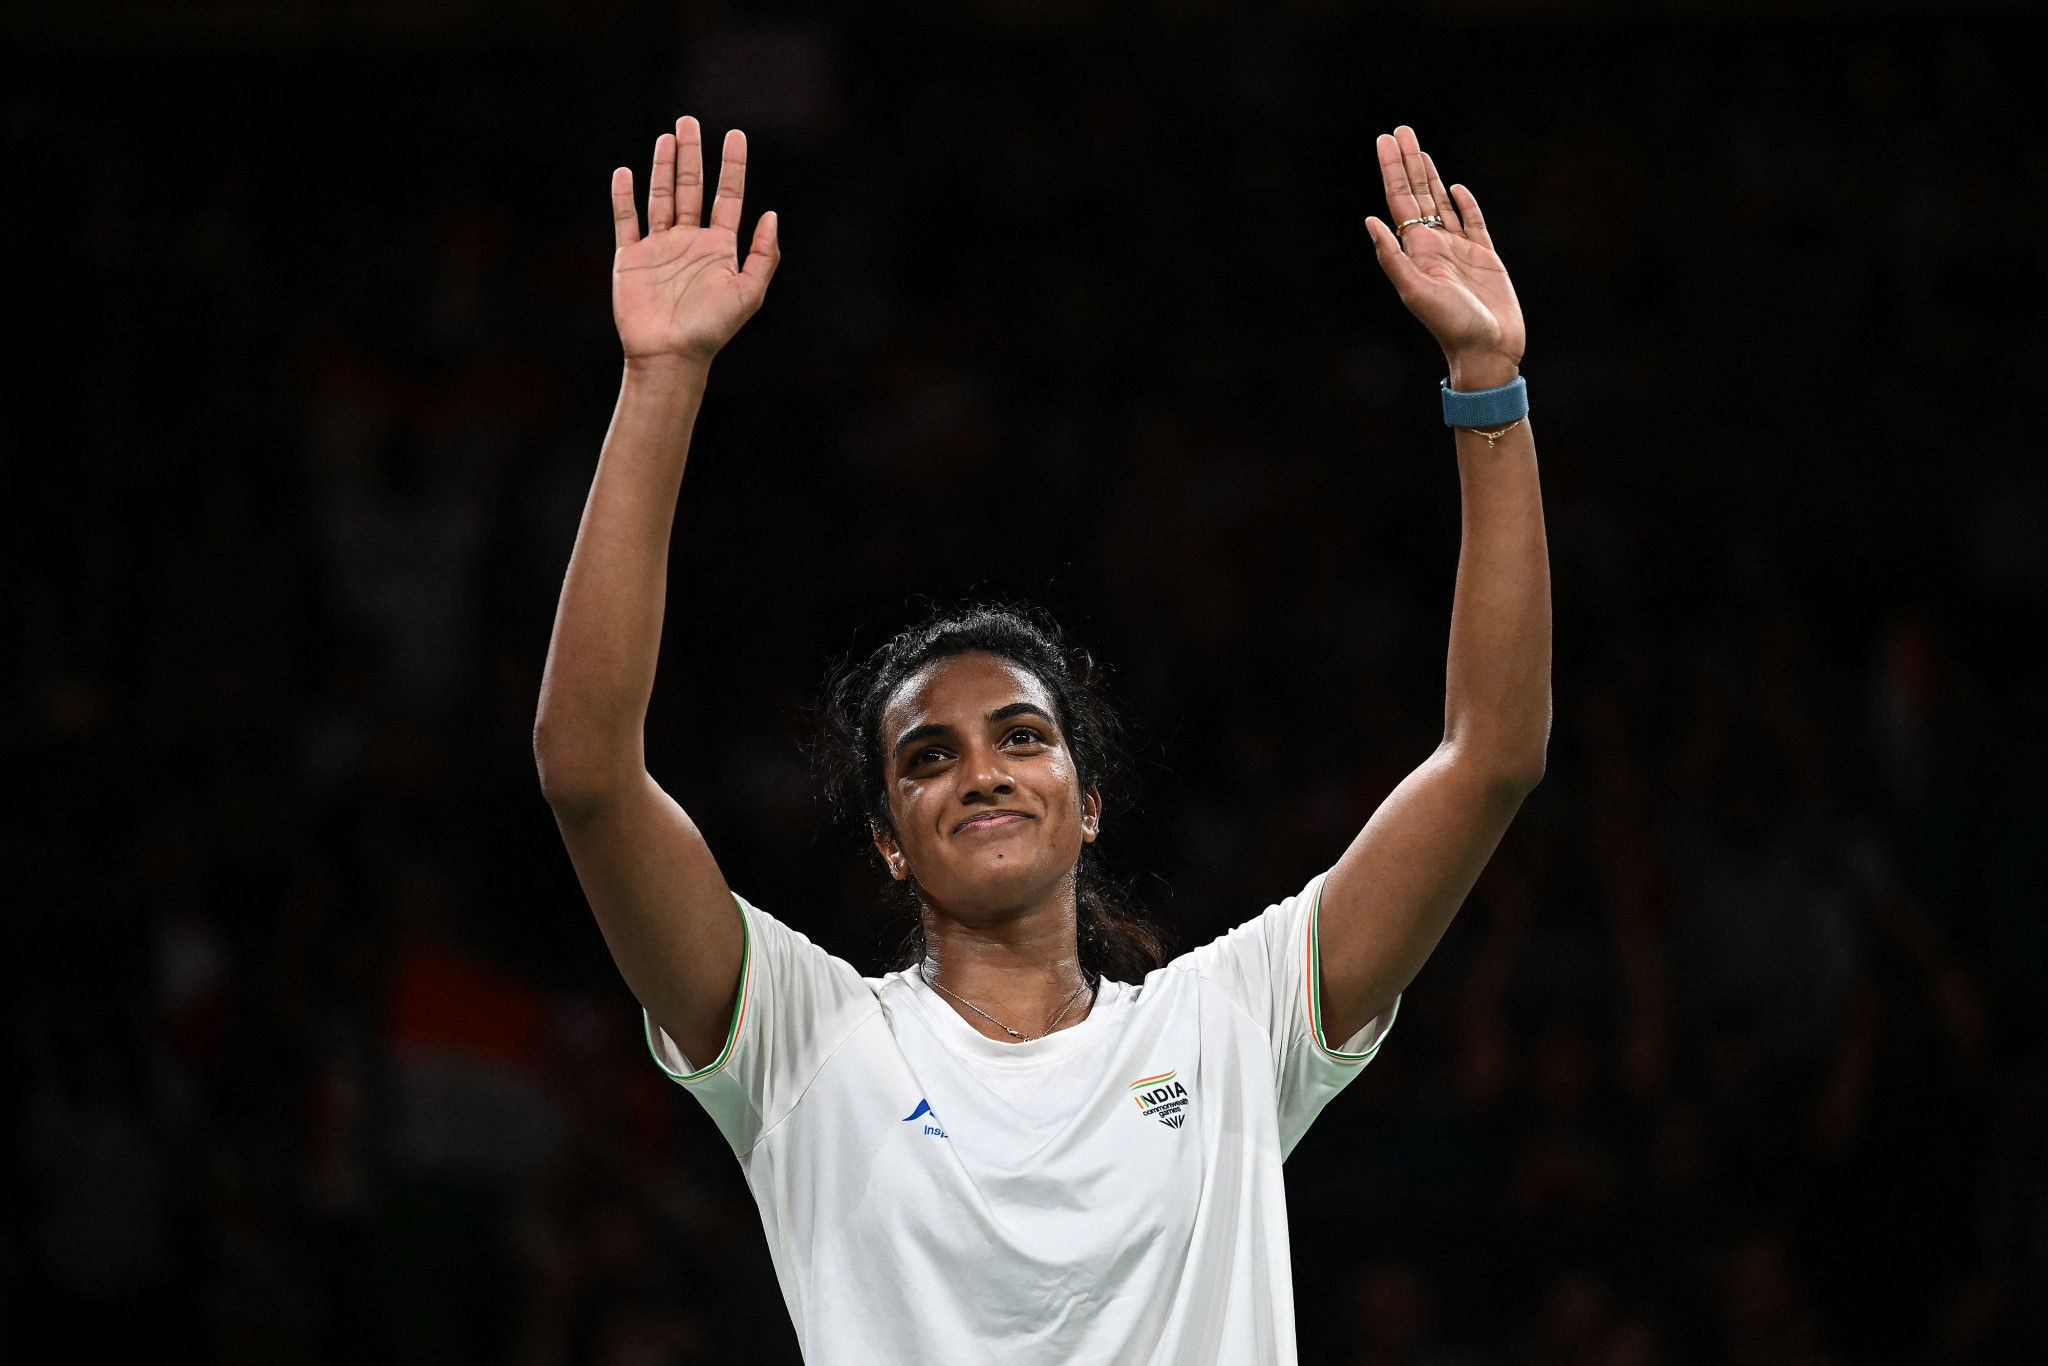 PV Sindhu was one of the Indian gold medallists at Birmingham 2022 ©Getty Images